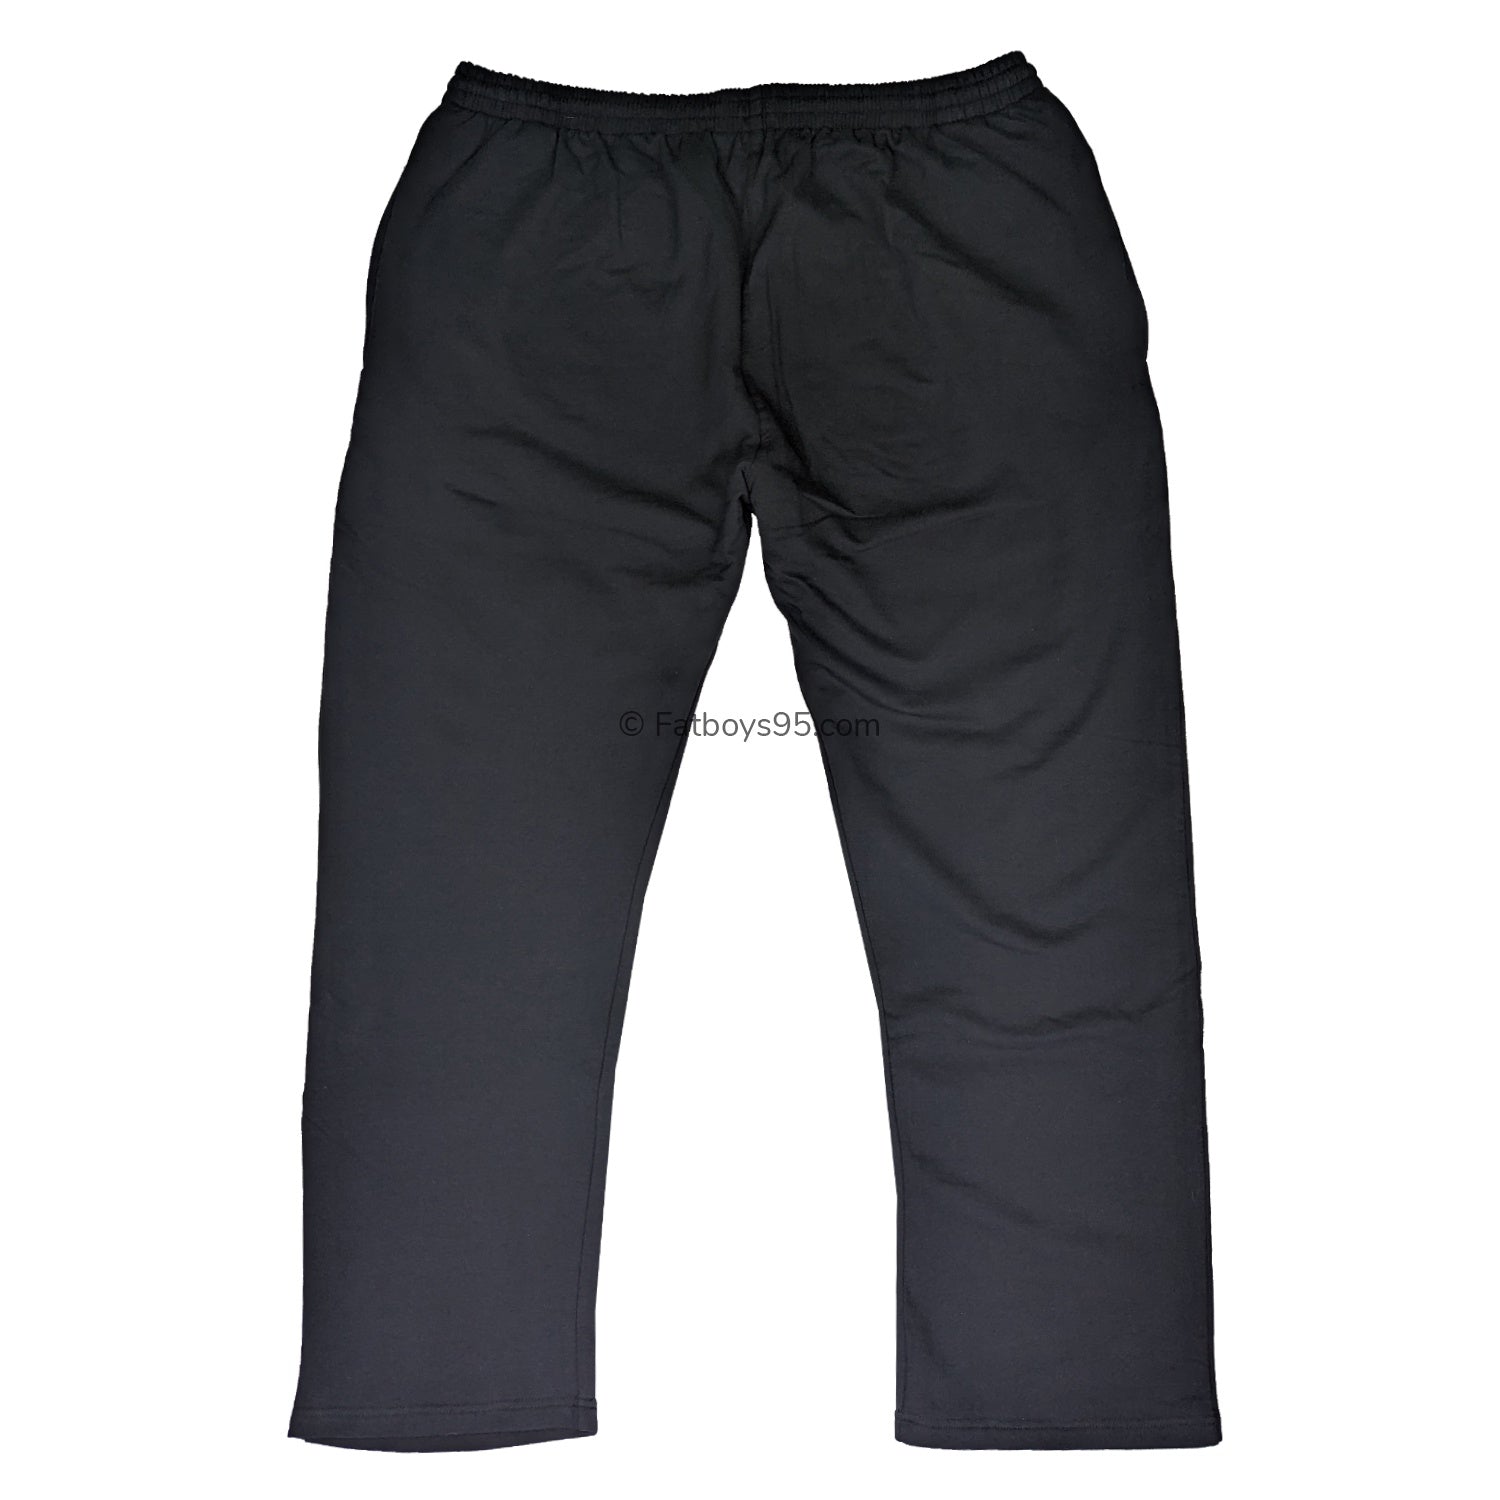 48 Pieces Mens Tricot Track Pants Athletic Pants In Assorted Colors And  Sizes M-2xl - Mens Sweatpants - at - alltimetrading.com